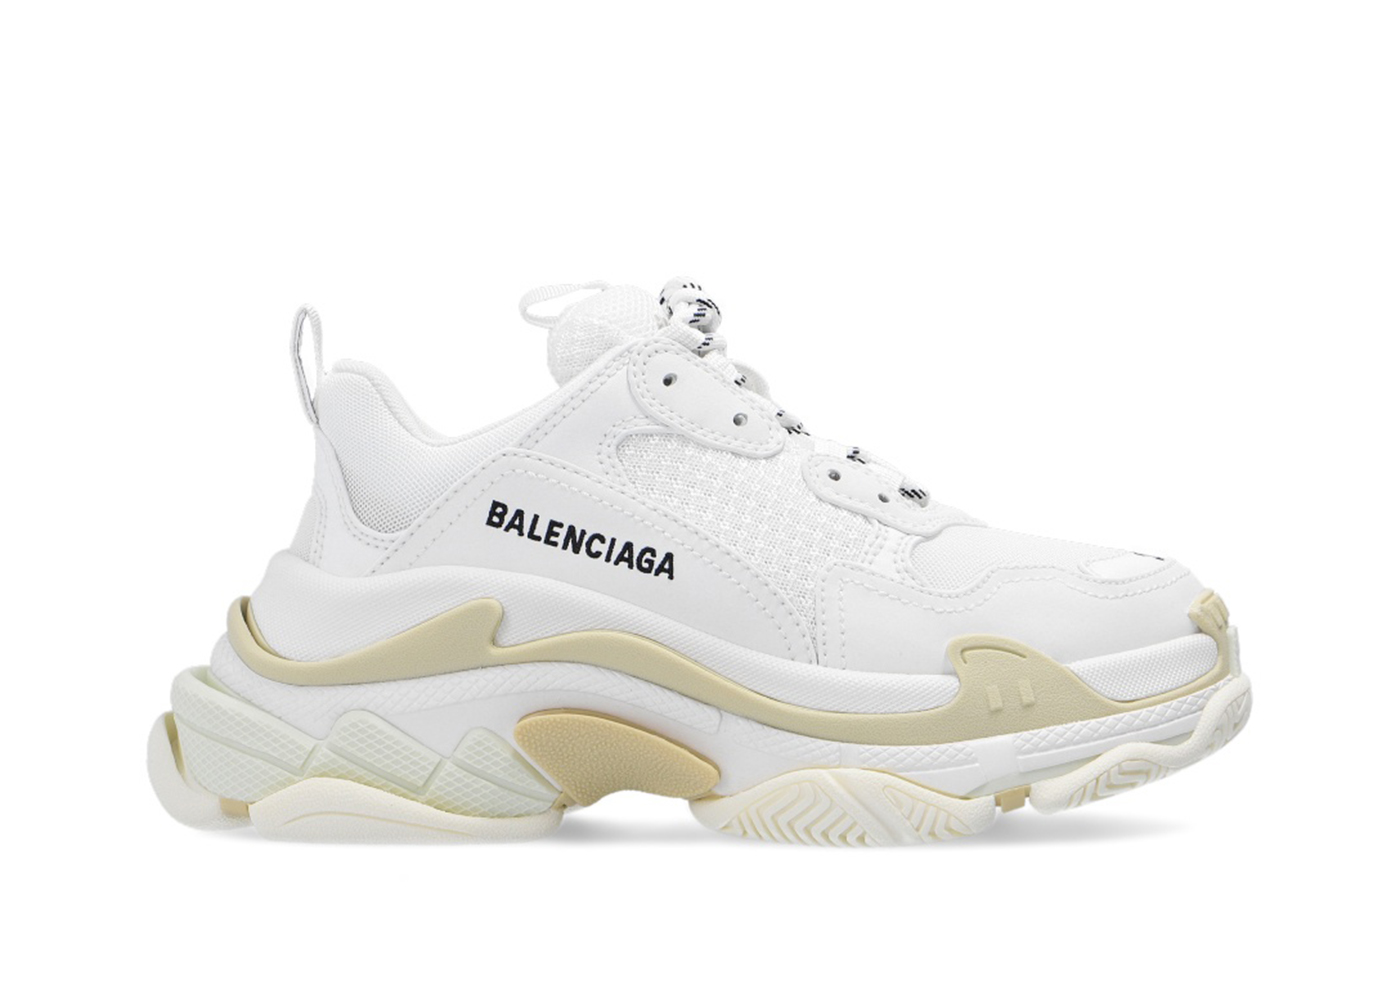 Luxury Sneakers on Instagram 250 Balenciaga 19  Sneakers fashion  Fluffy shoes Womens fashion sneakers